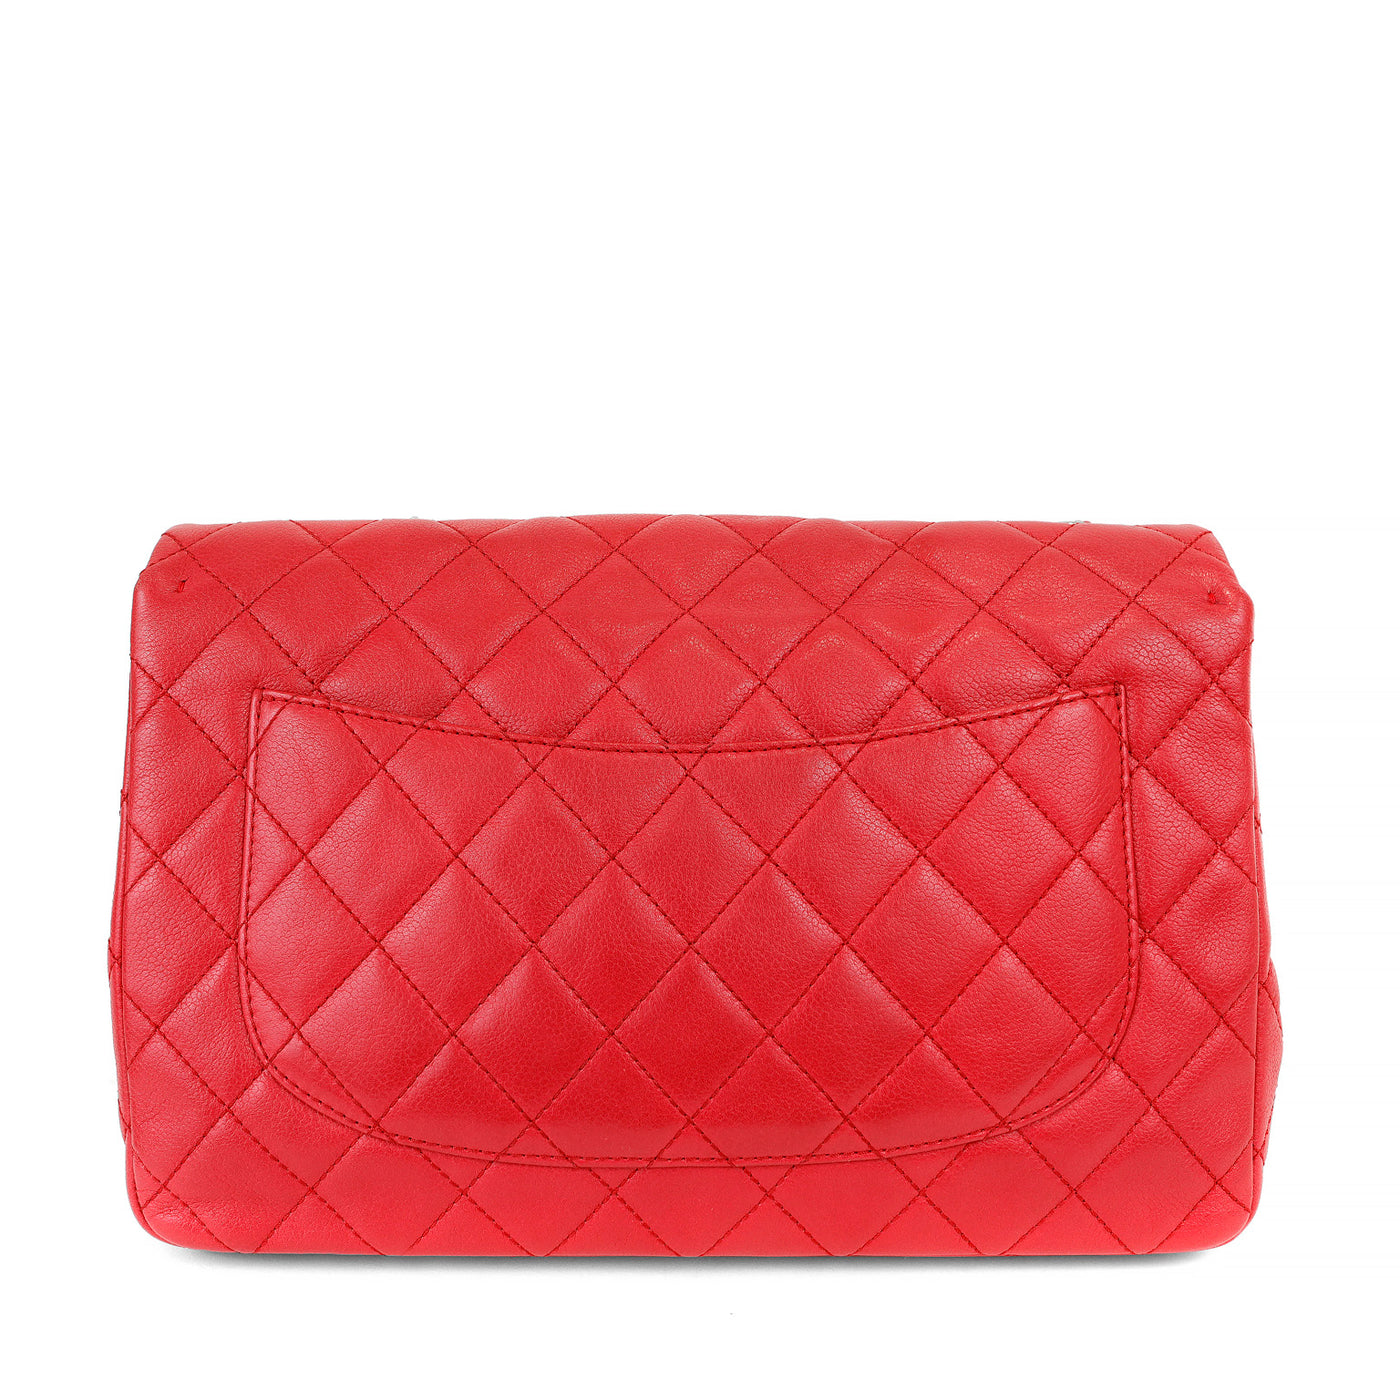 Chanel Red Lipstick Calfskin Single Flap Jumbo Classic with Silver Hardware